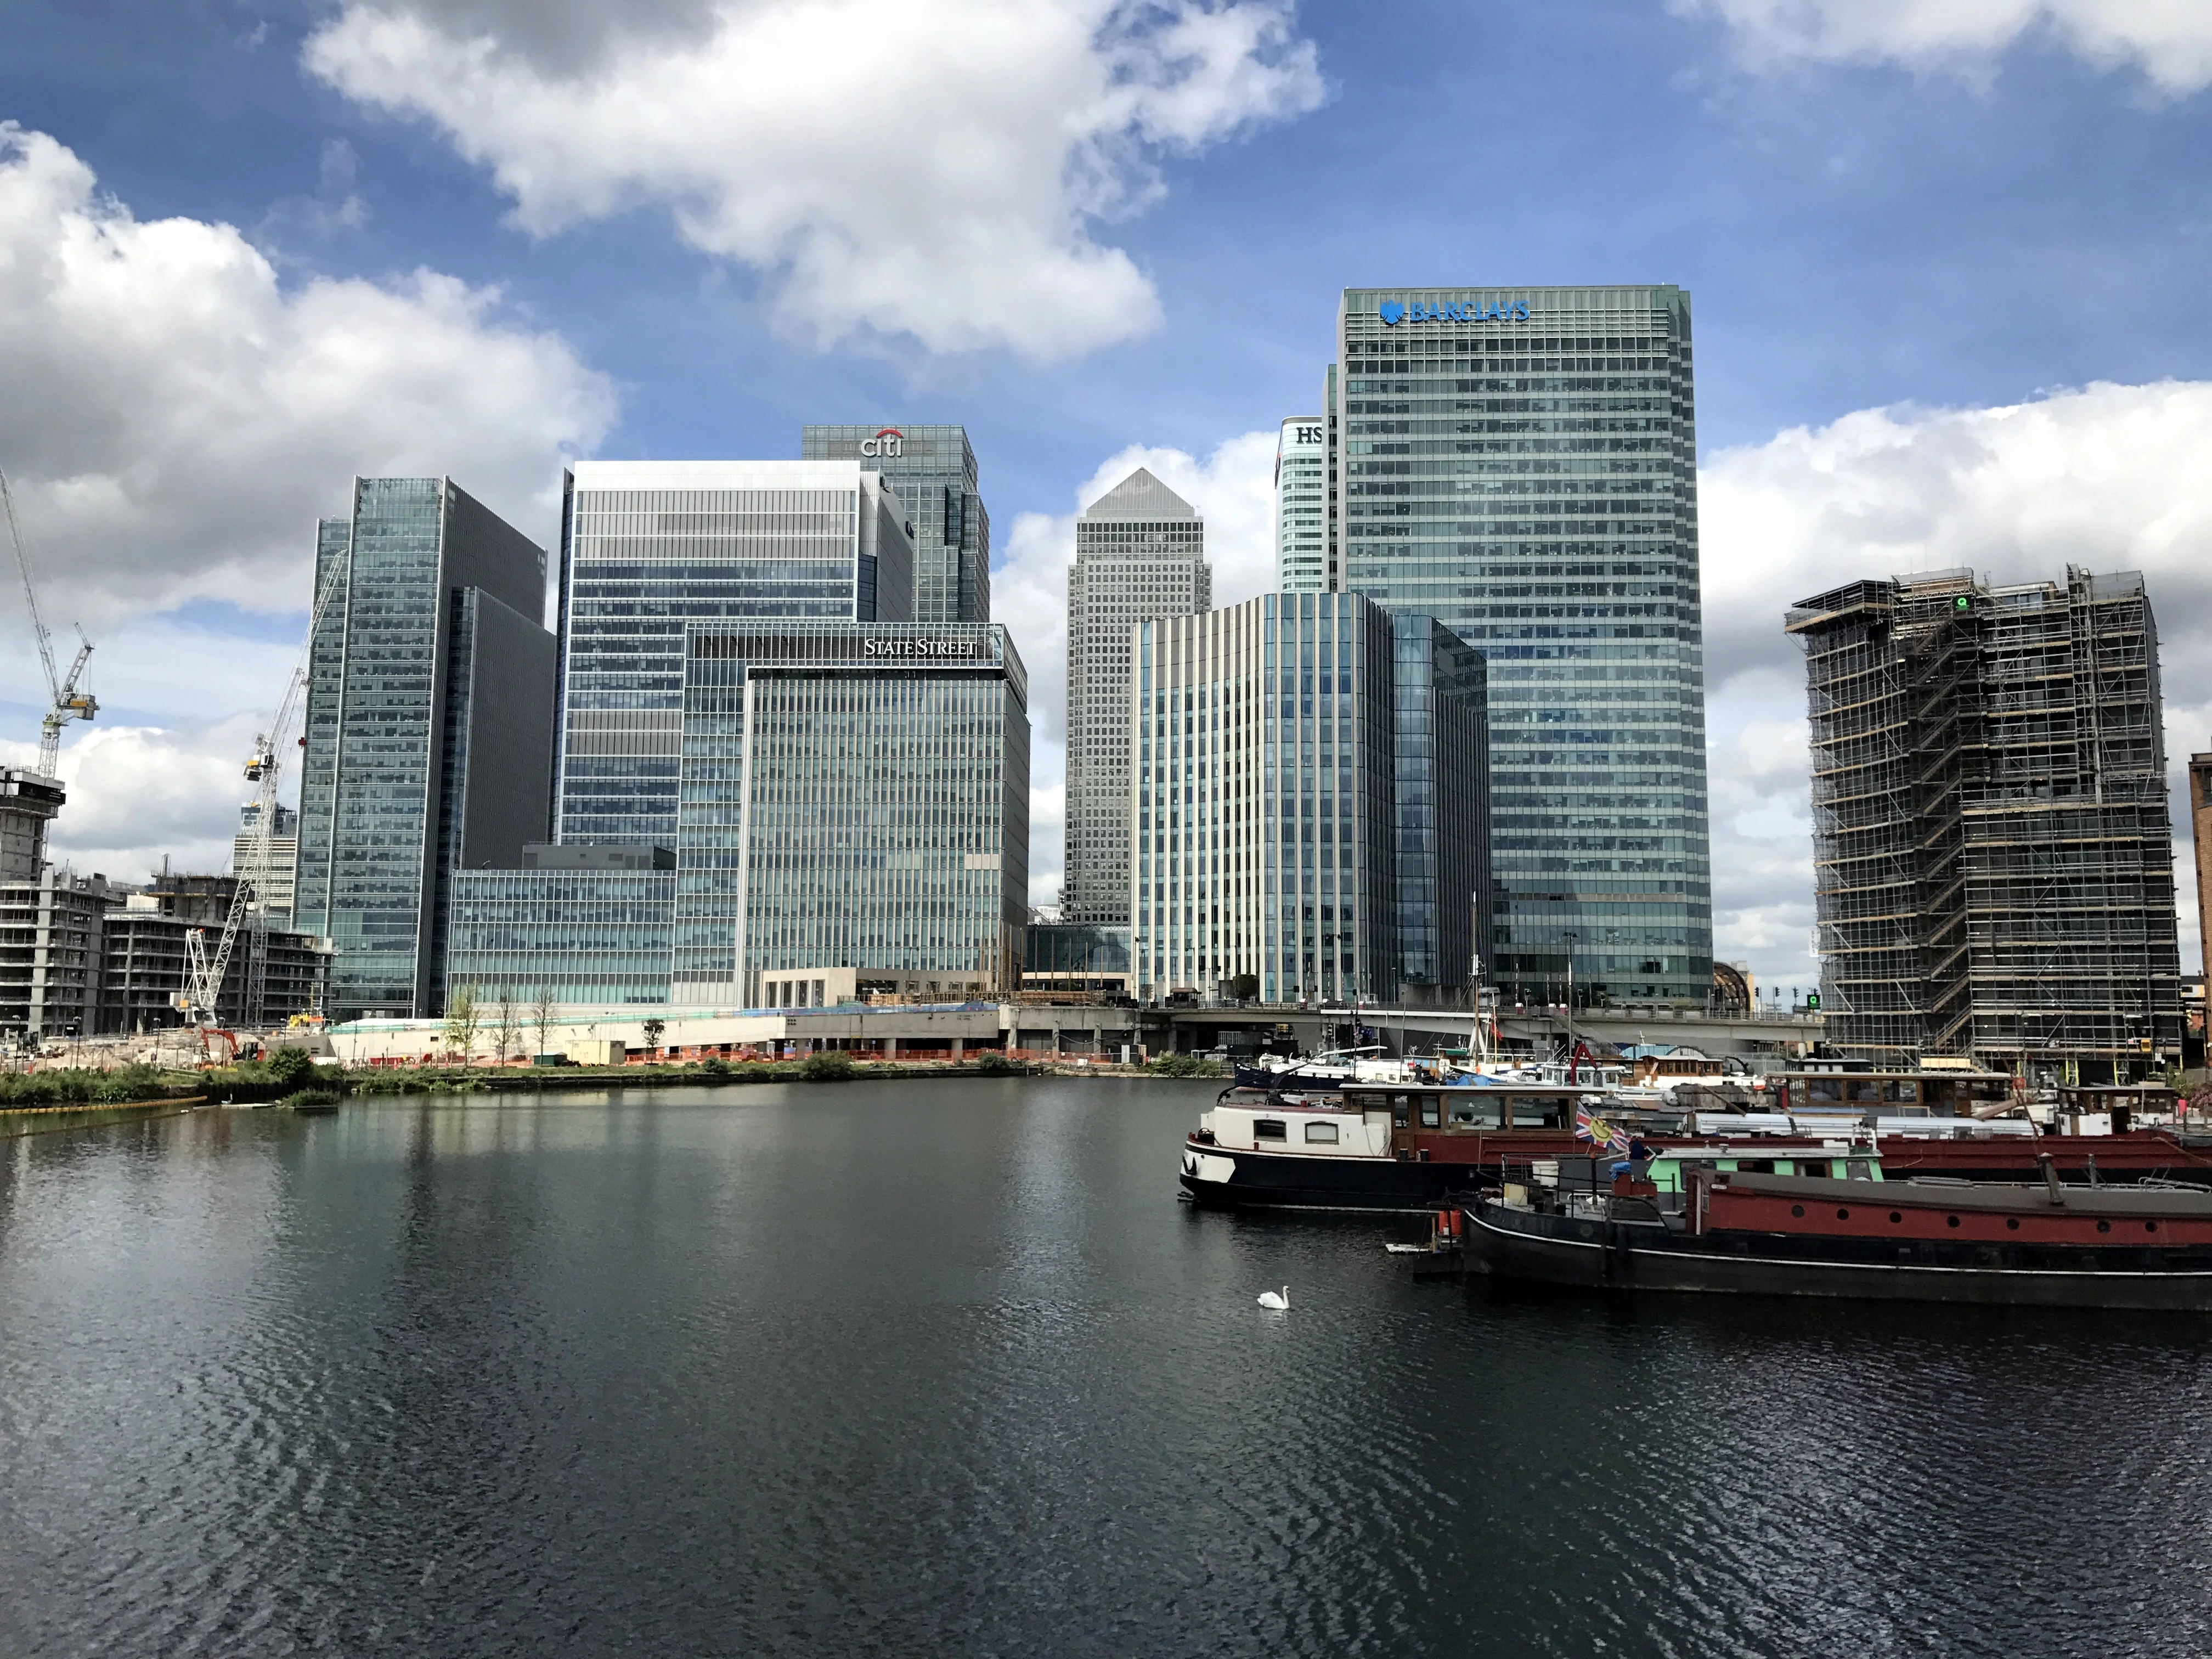 Canary Wharf and One Canada Square, UCL School of Management campus